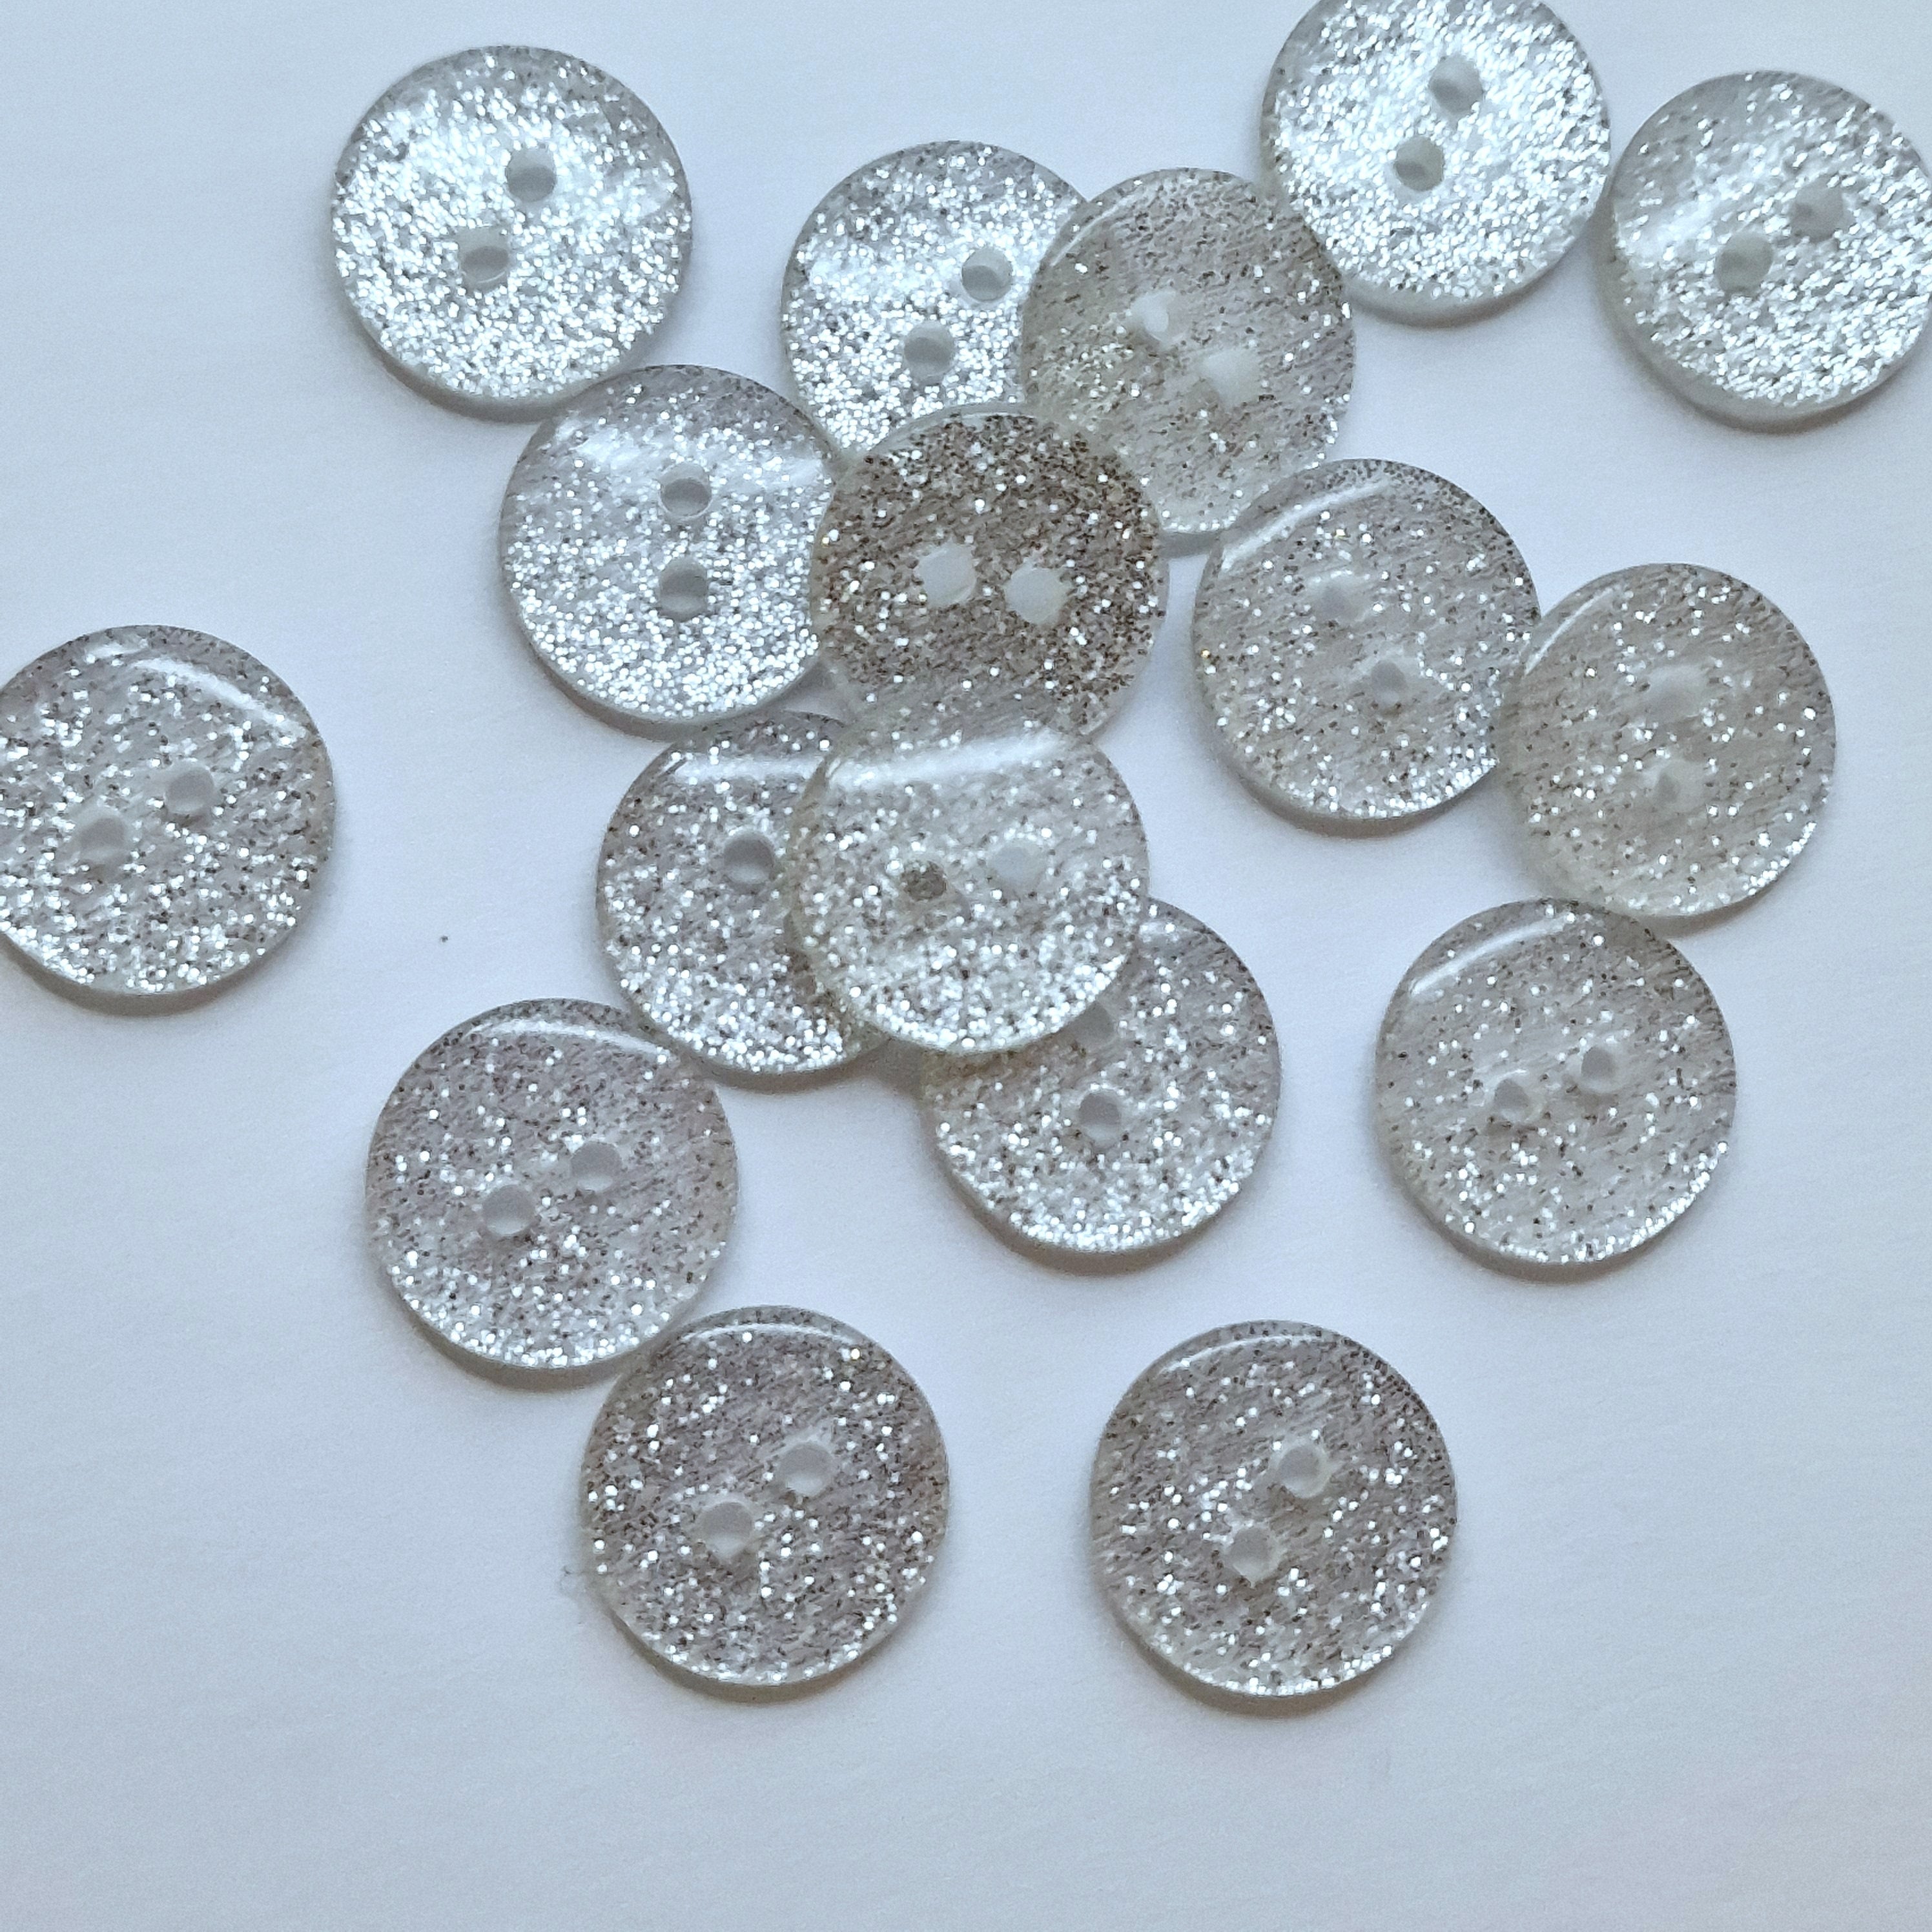 MajorCrafts 60pcs 12.5mm Clear Silver Glitter 2 Holes Round Sewing Resin Buttons